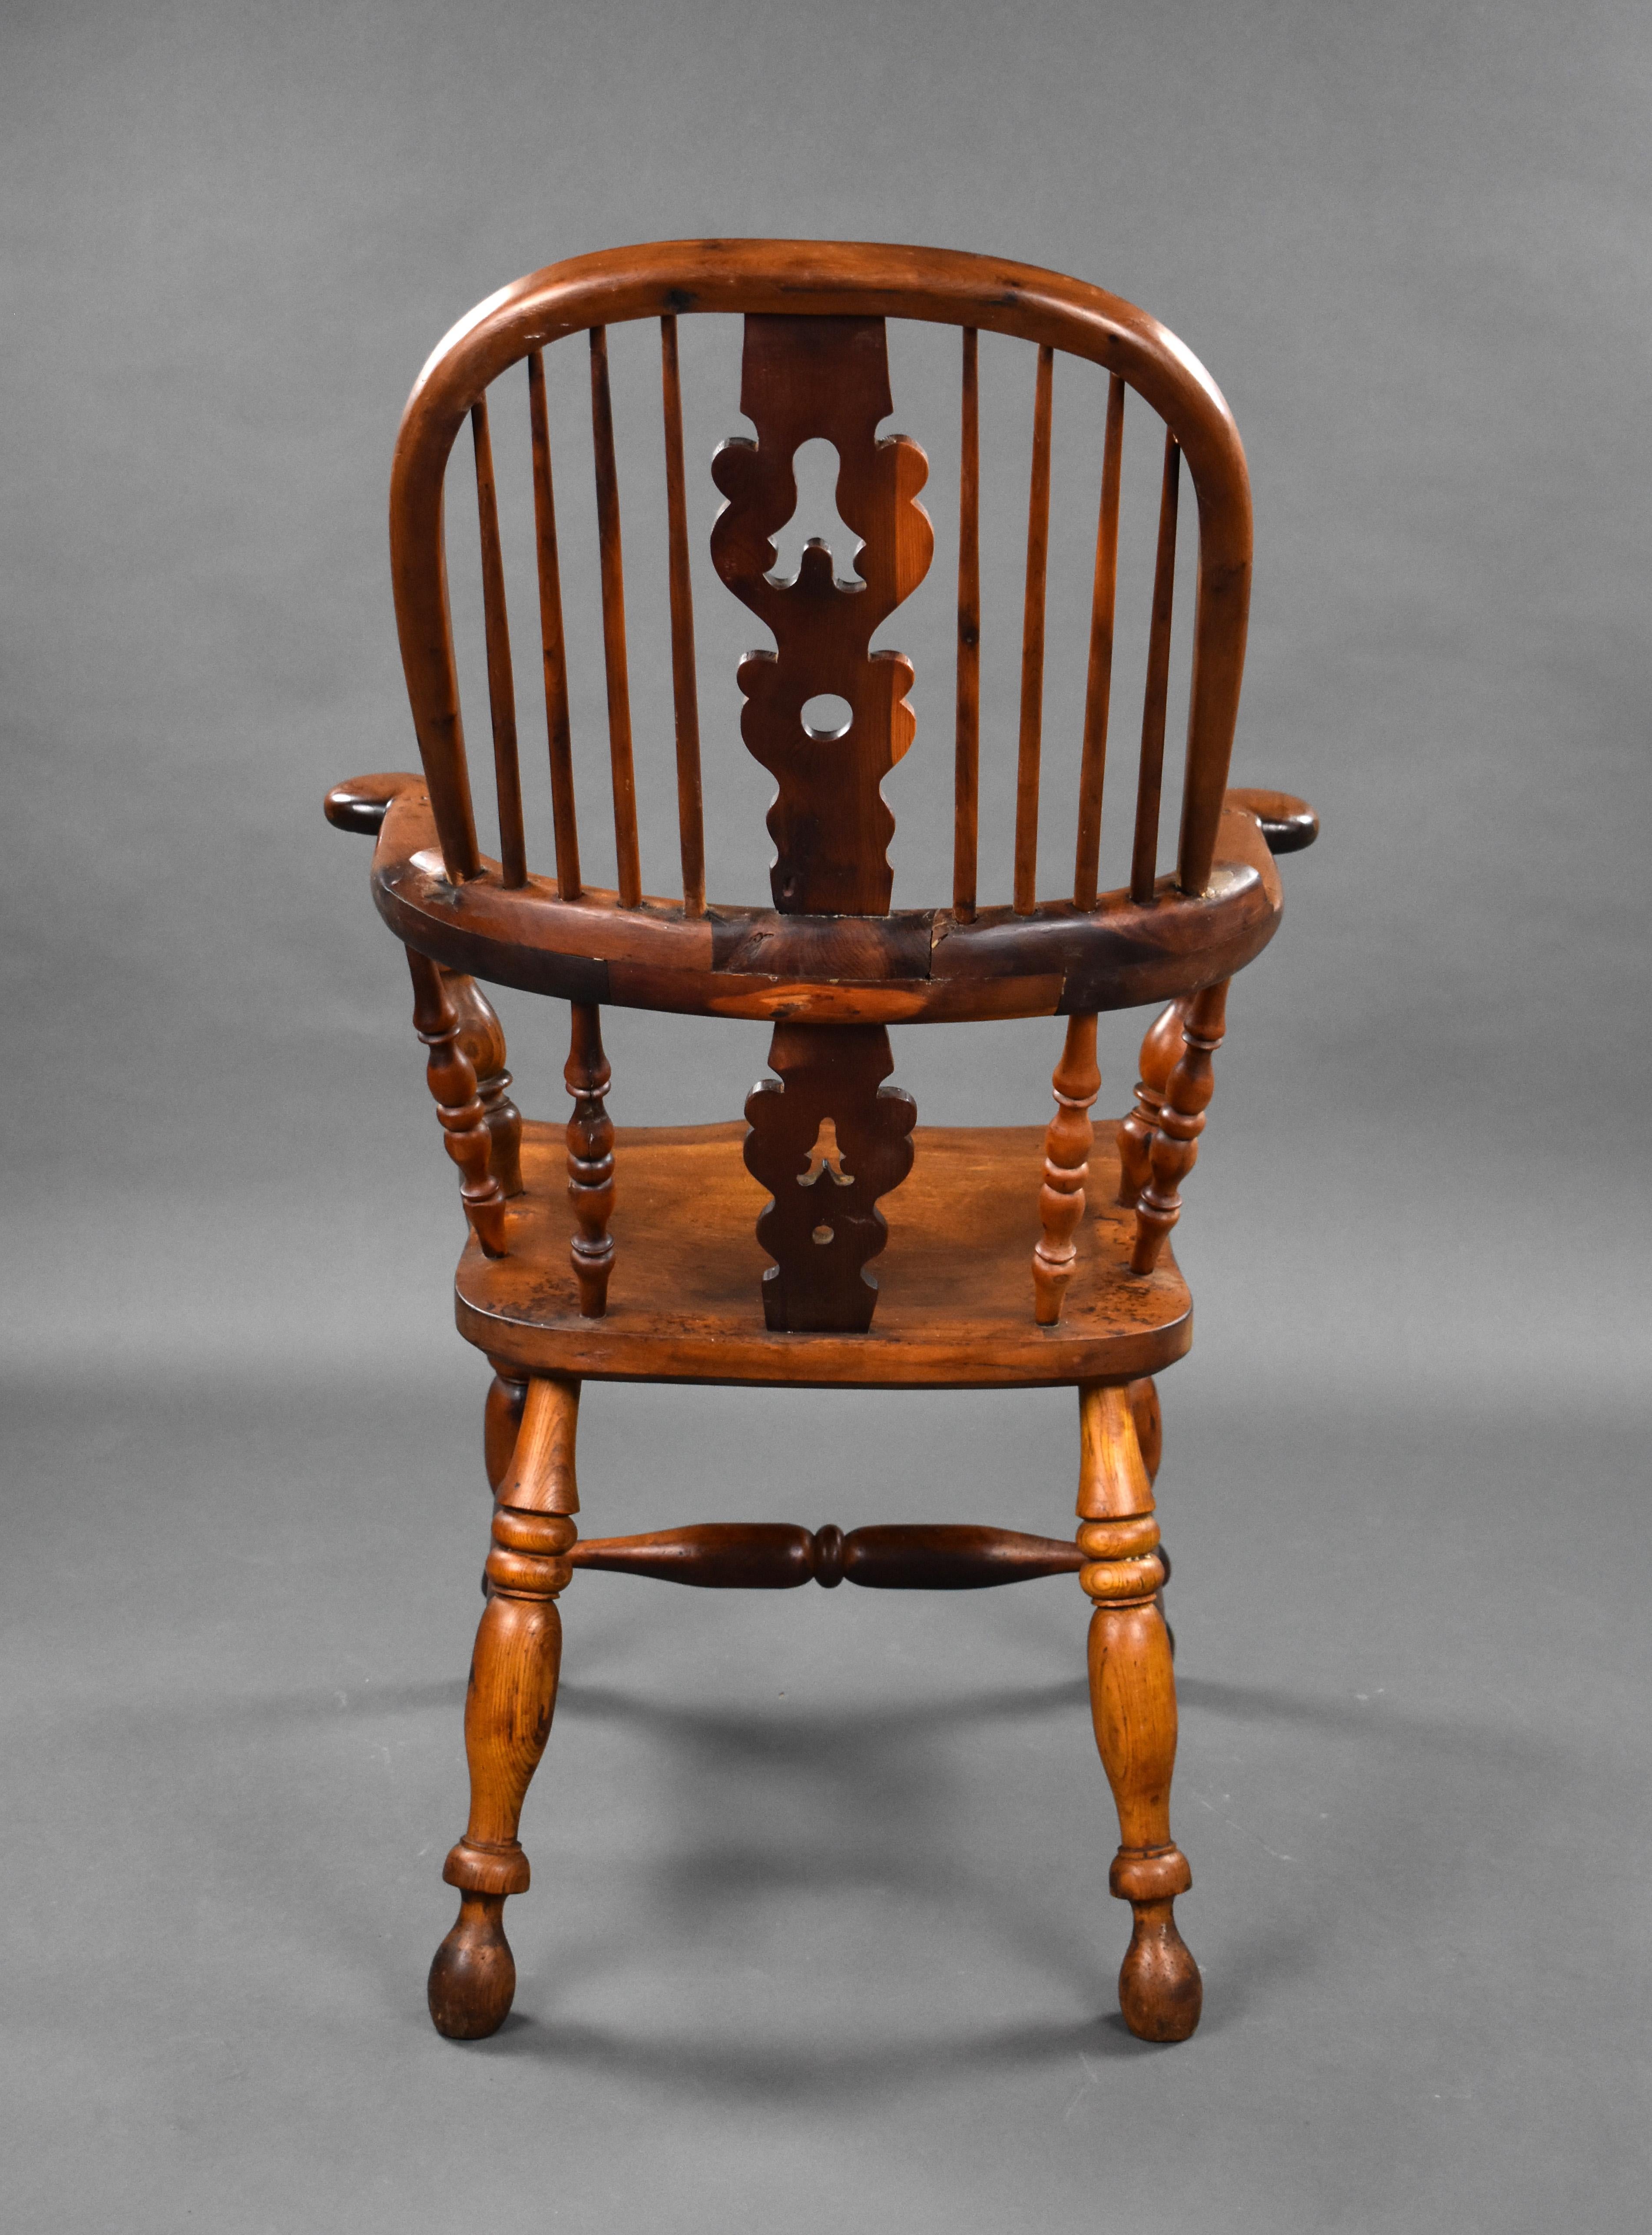 Elm 19th Century English Yew Wood High Back Broad Arm Windsor Chair For Sale